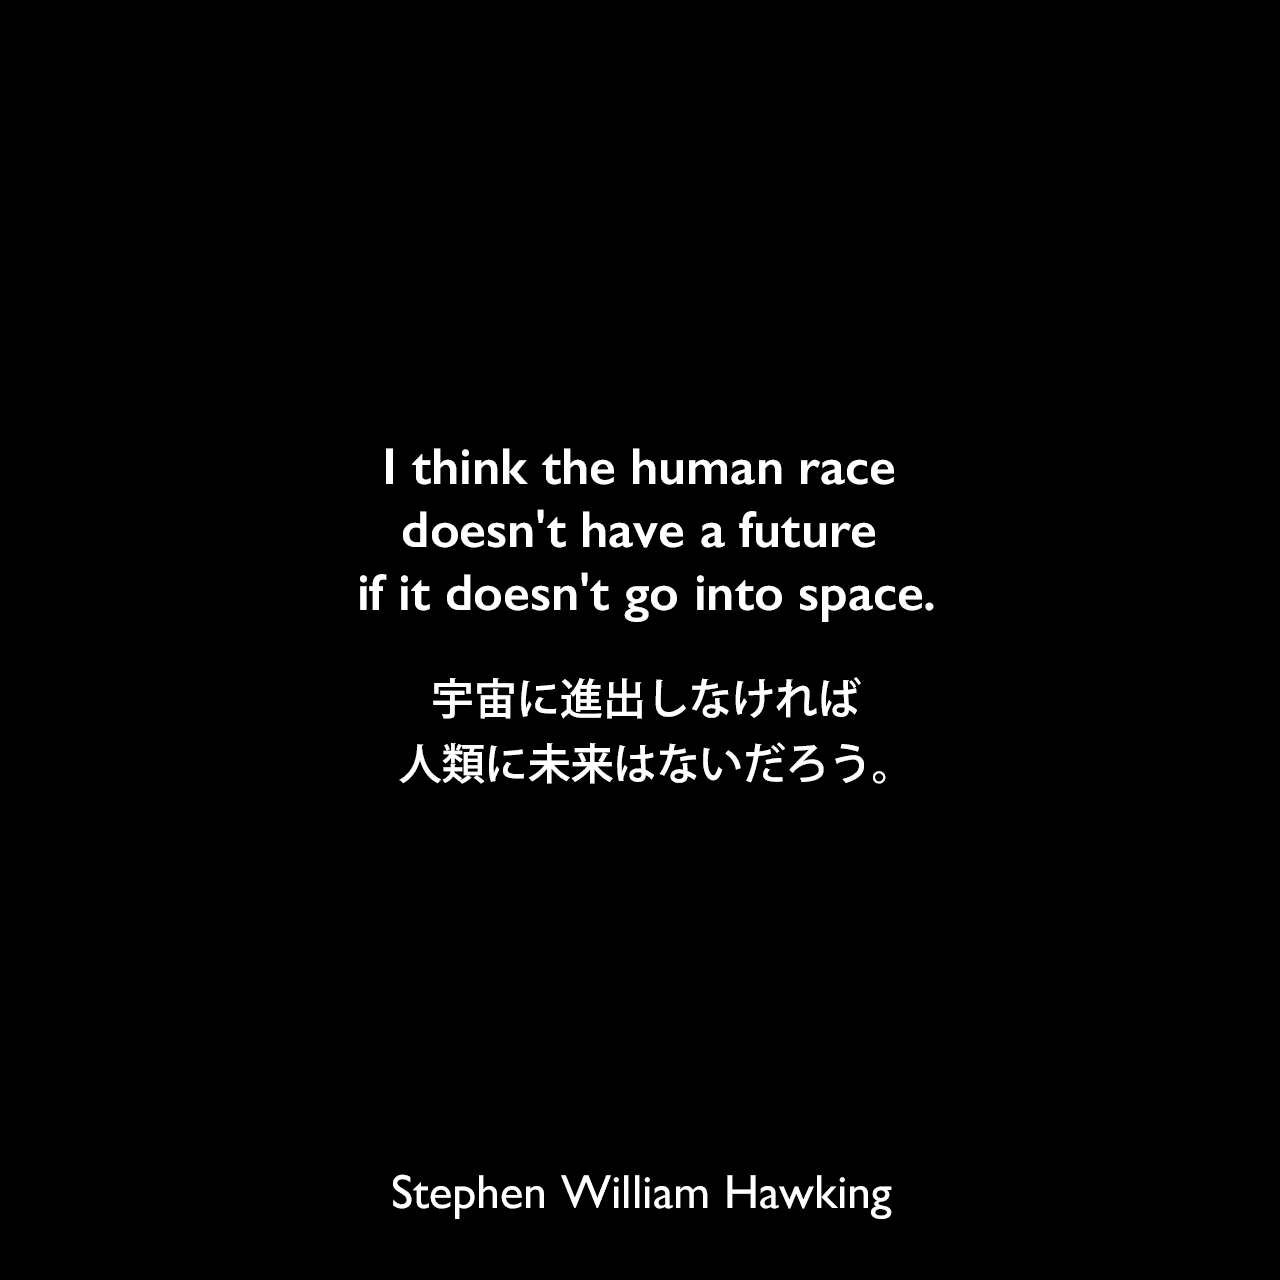 I think the human race doesn't have a future if it doesn't go into space.宇宙に進出しなければ人類に未来はないだろう。Stephen William Hawking